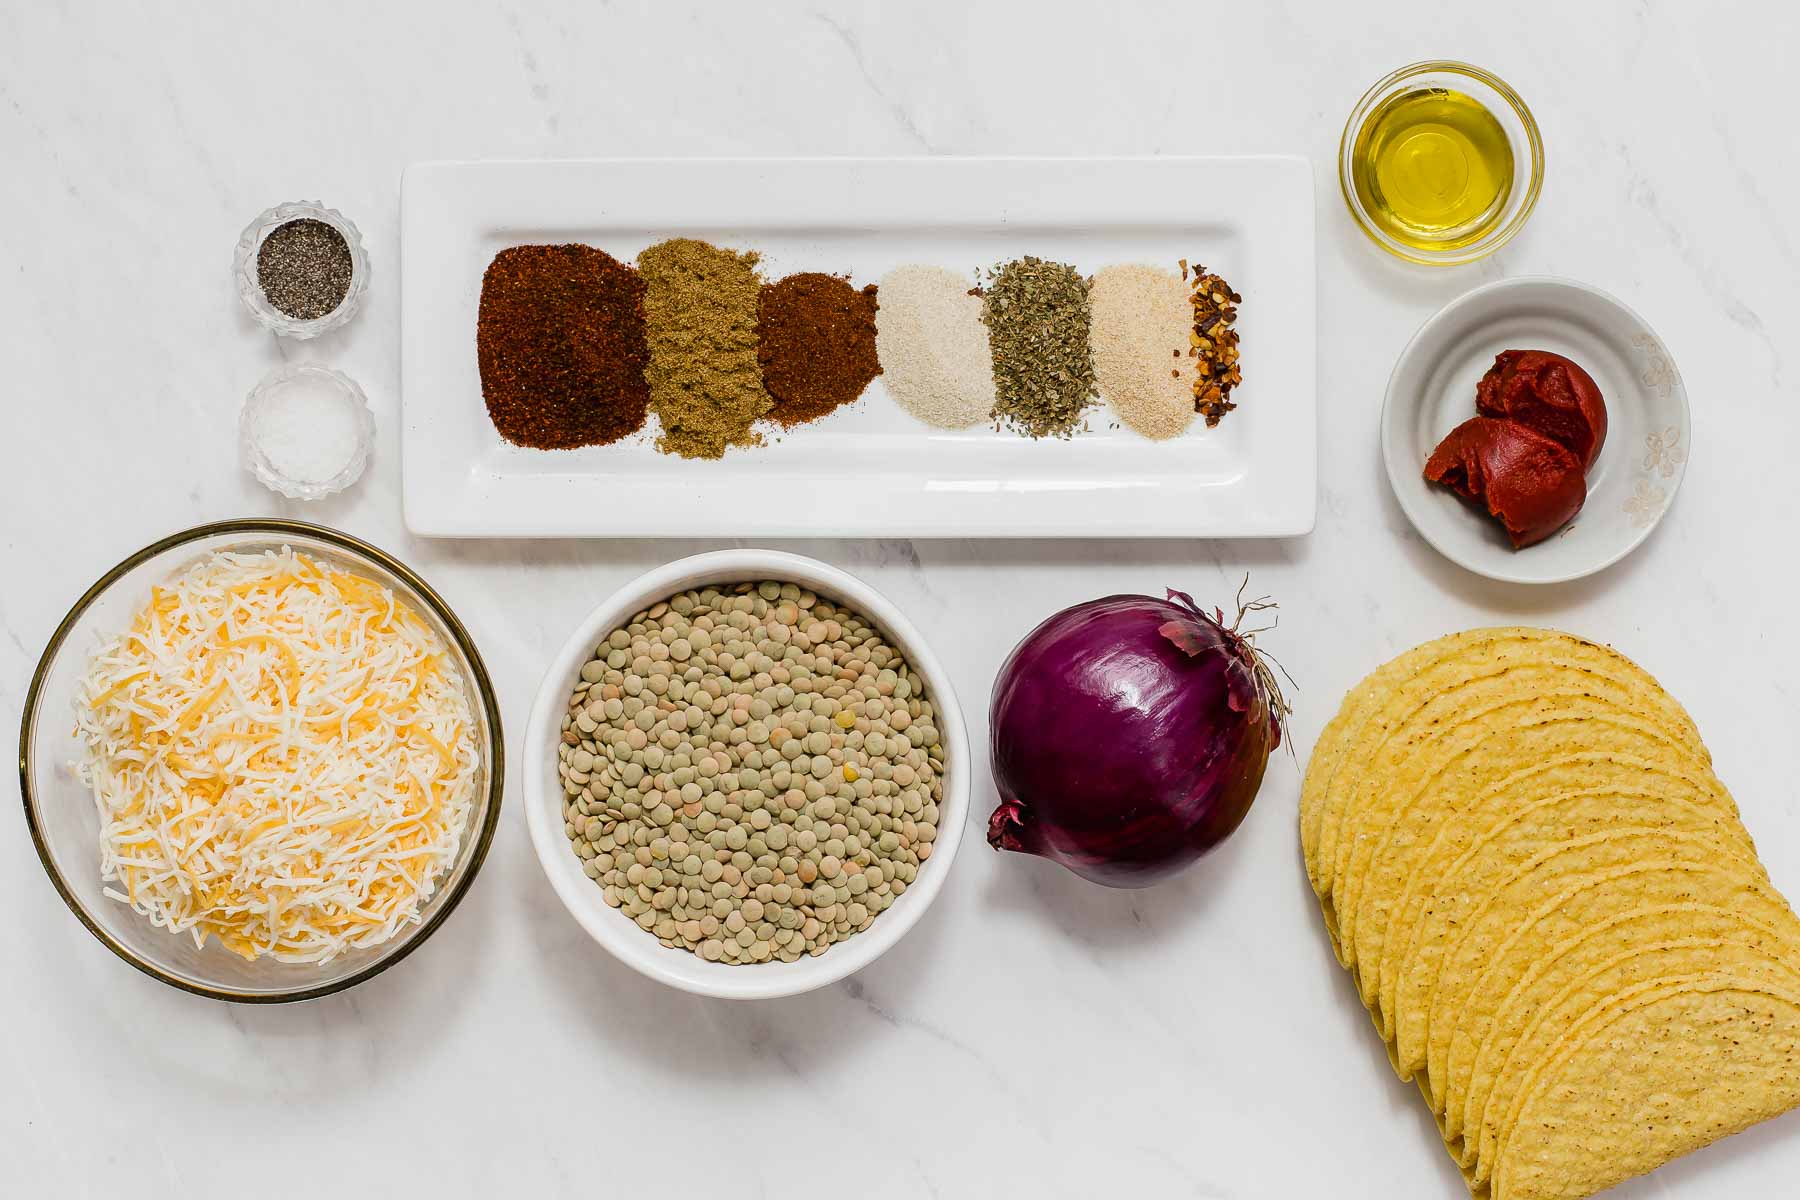 Ingredients for making lentil tacos on white table.